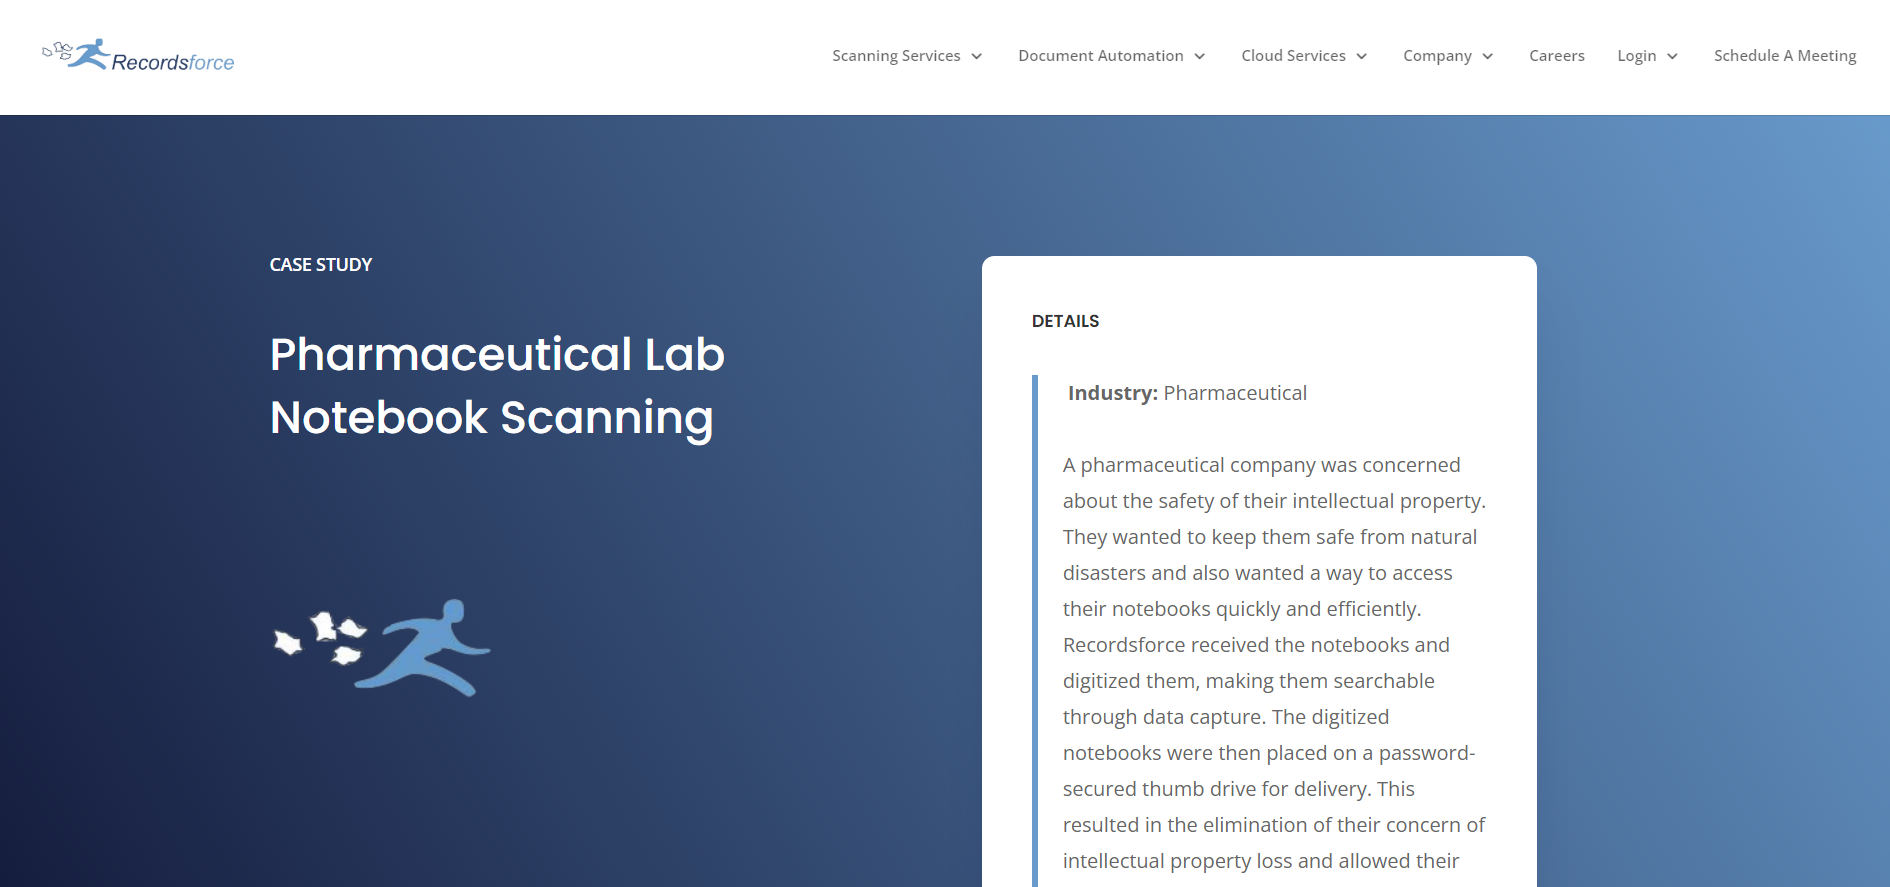 pharmaceutical lab notebook scanning case study